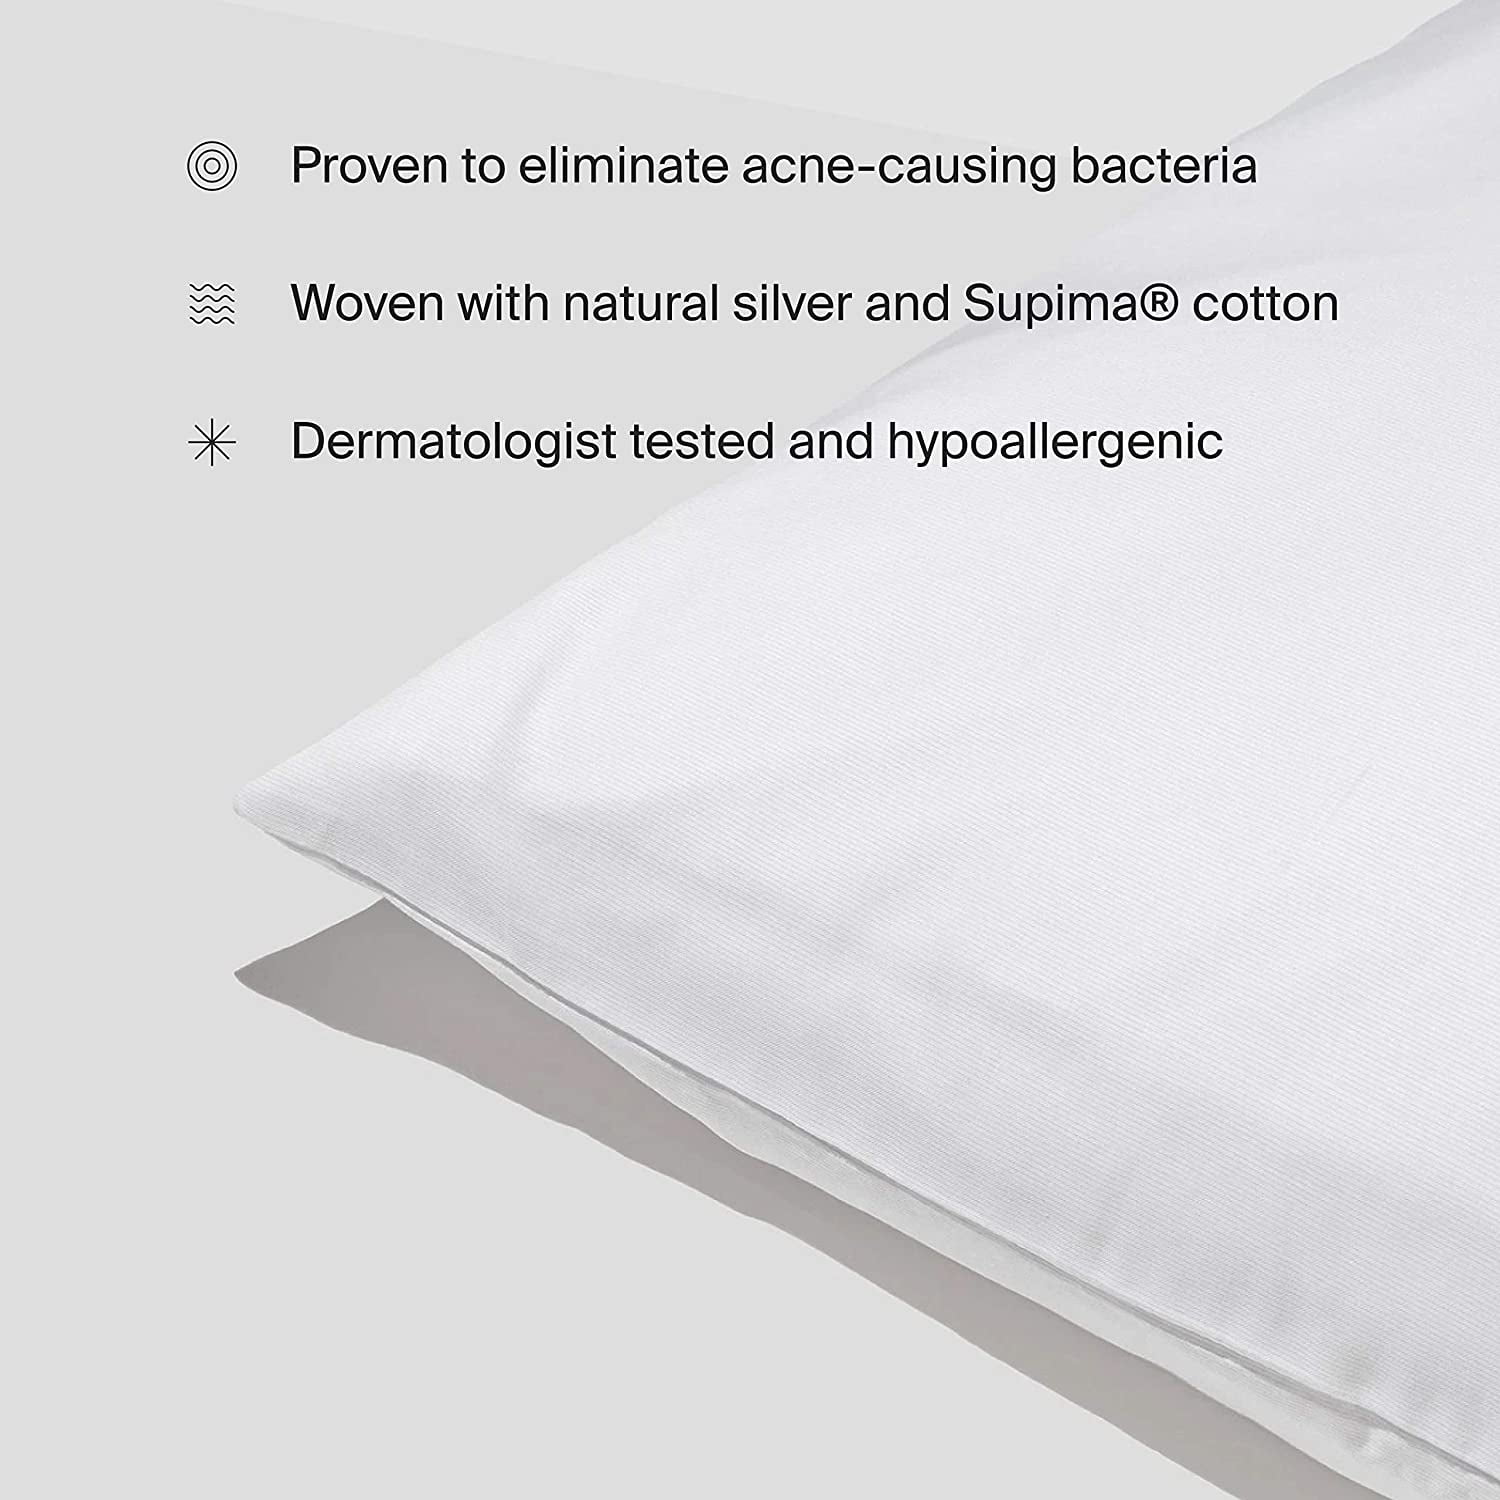 Woven with Pure Silver and Premium Breathable Supima Cotton King, Silver Ultra Soft & Hypoallergenic Antimicrobial Silvon Anti-Acne Silver Infused Pillowcase 